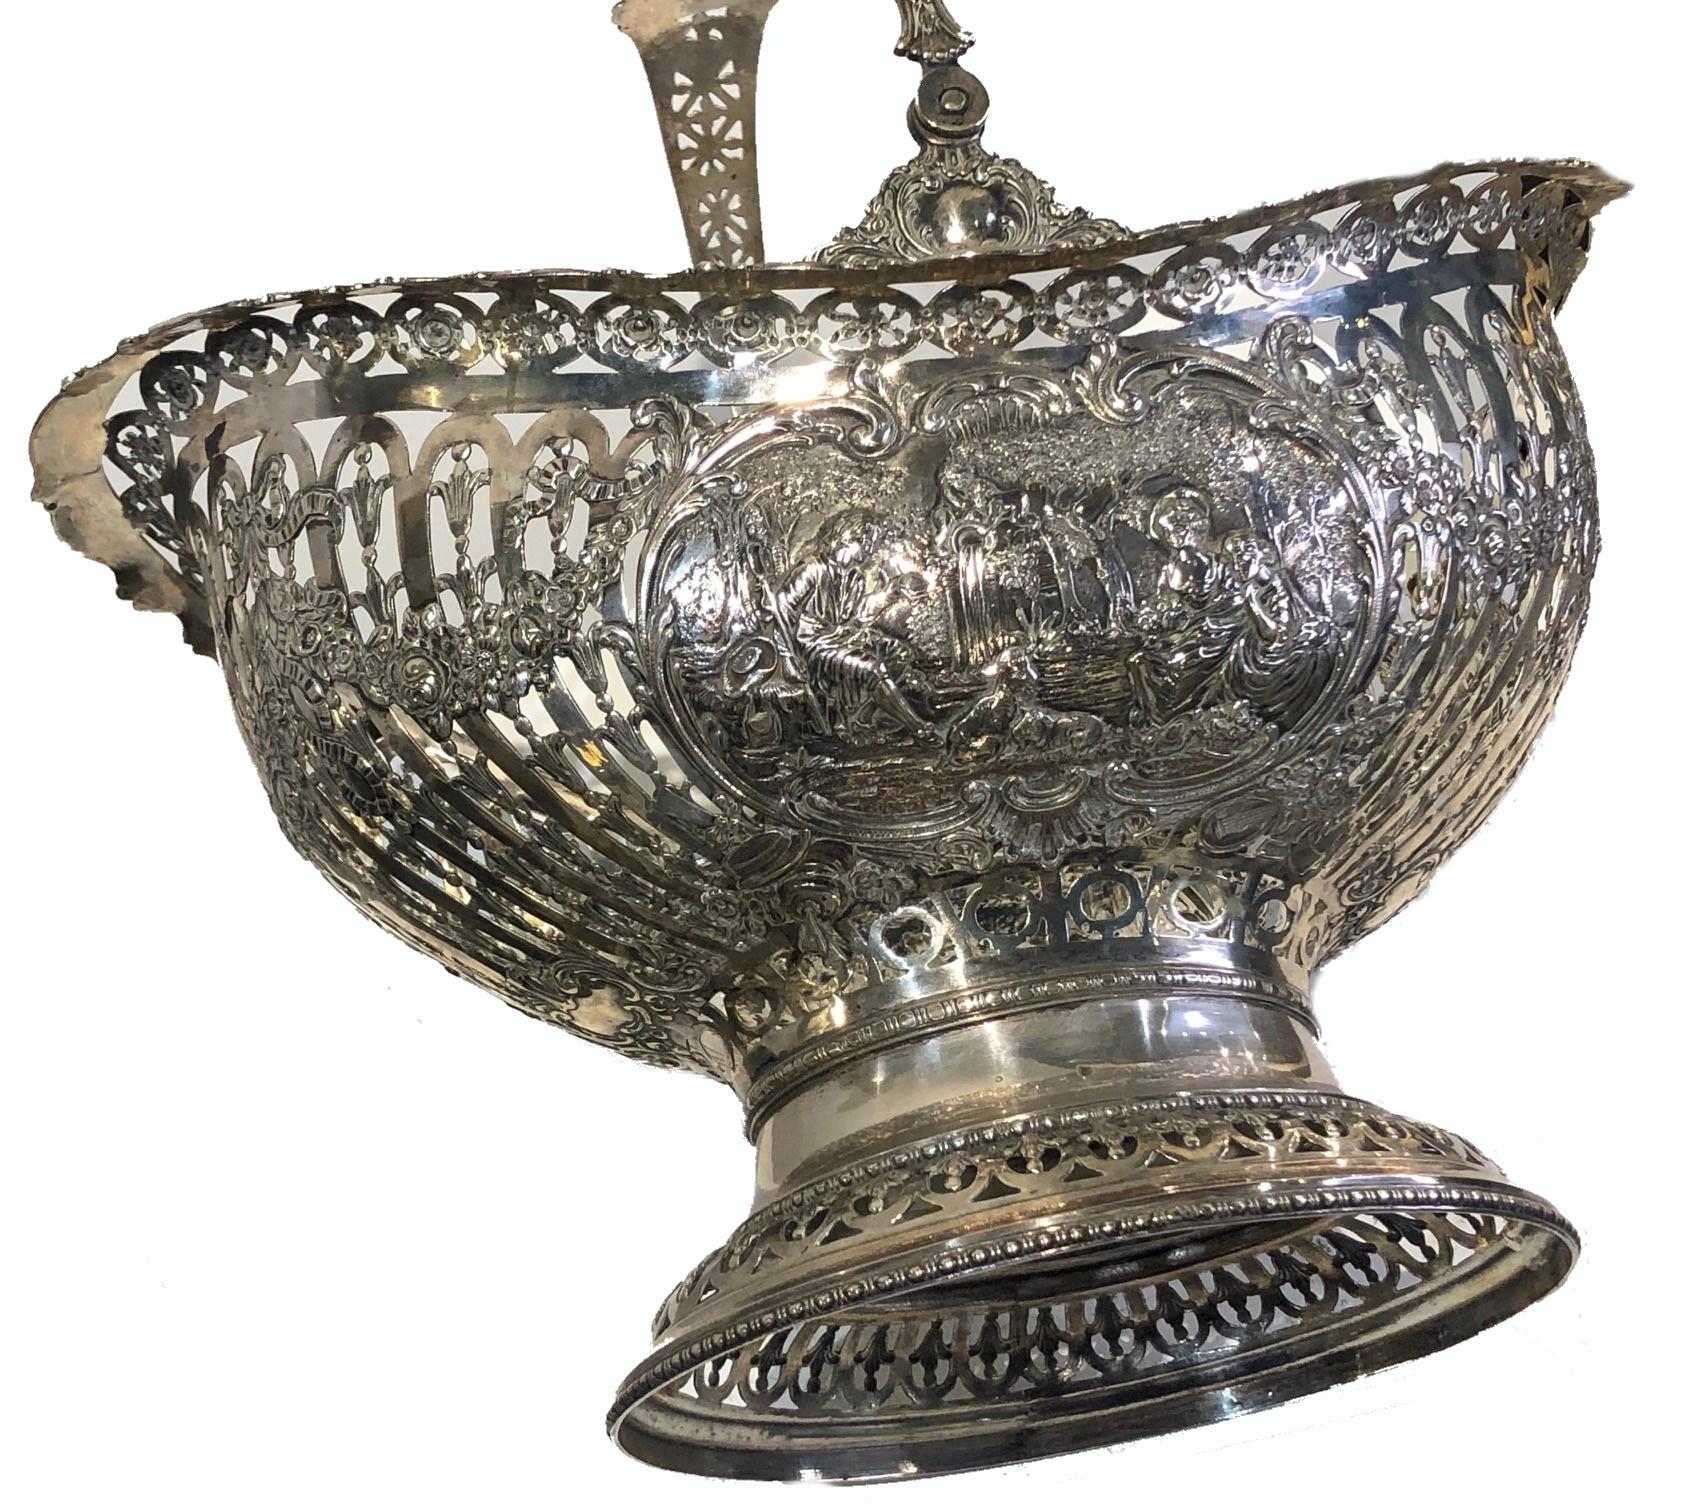 Rococo Revival Antique German Silver Fruit Serving Basket, Late 19th Century For Sale